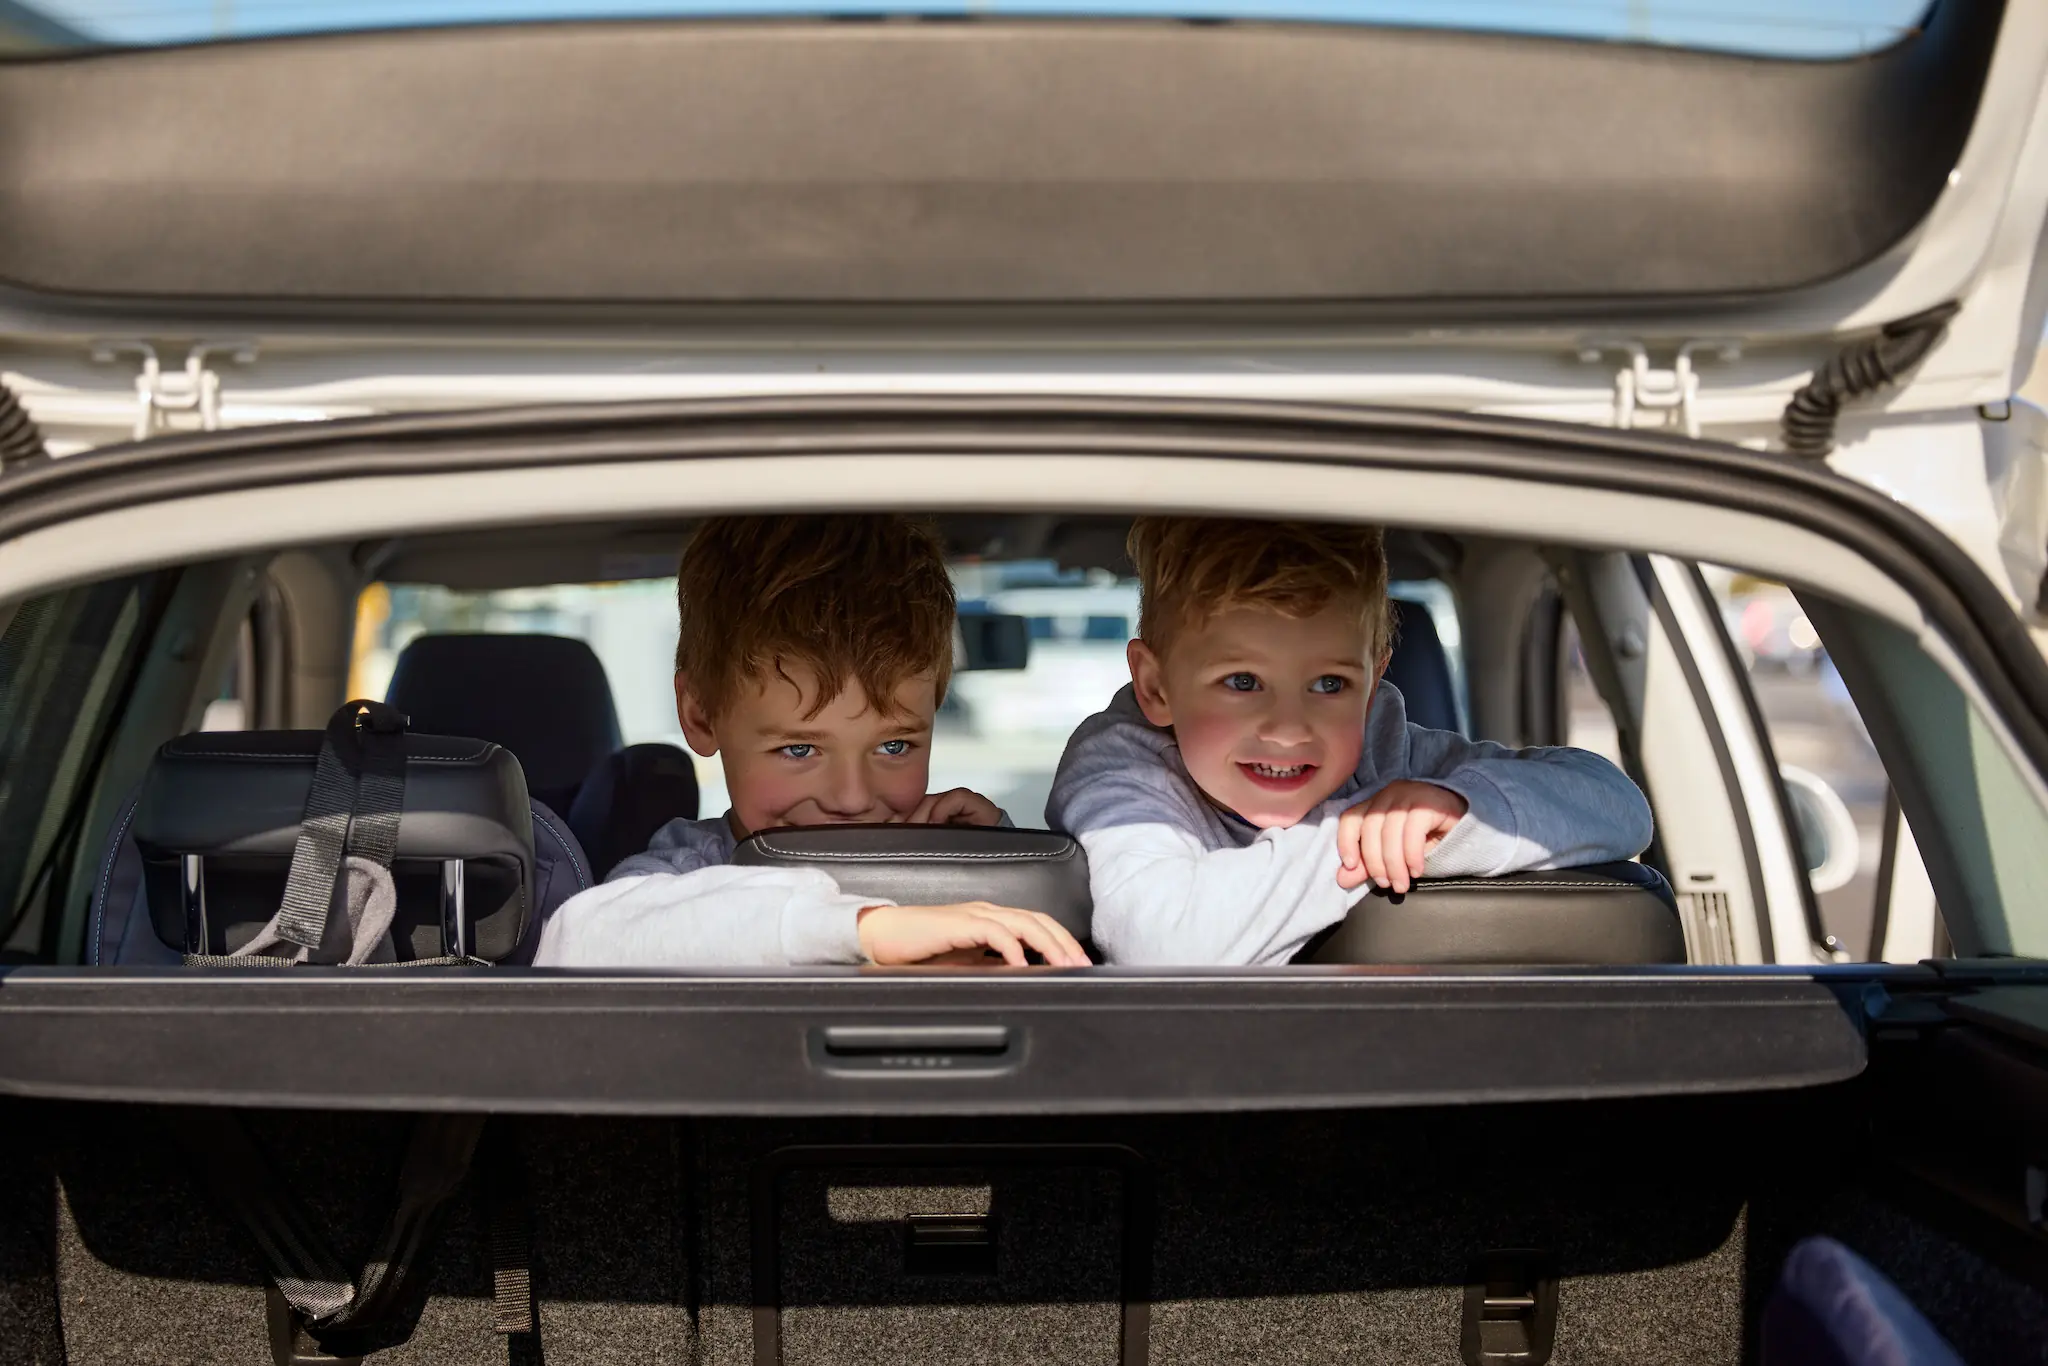 Two children smile at the camera over the backs of their seats through the car's open boot